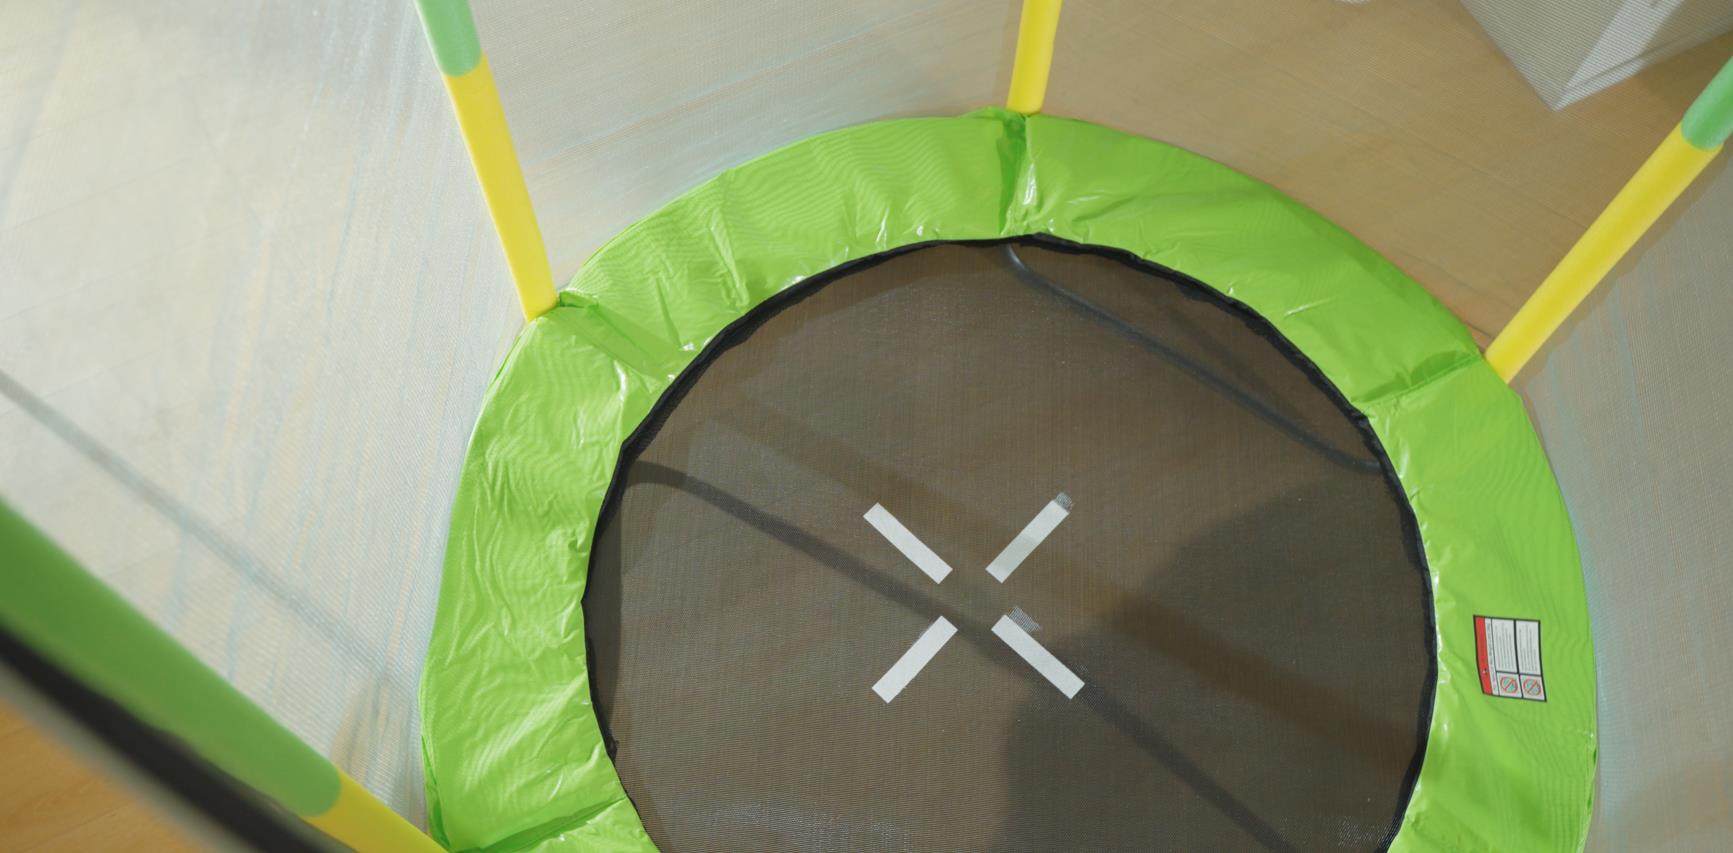 Are In-Ground Trampolines Safer Than Above-Ground Trampolines?